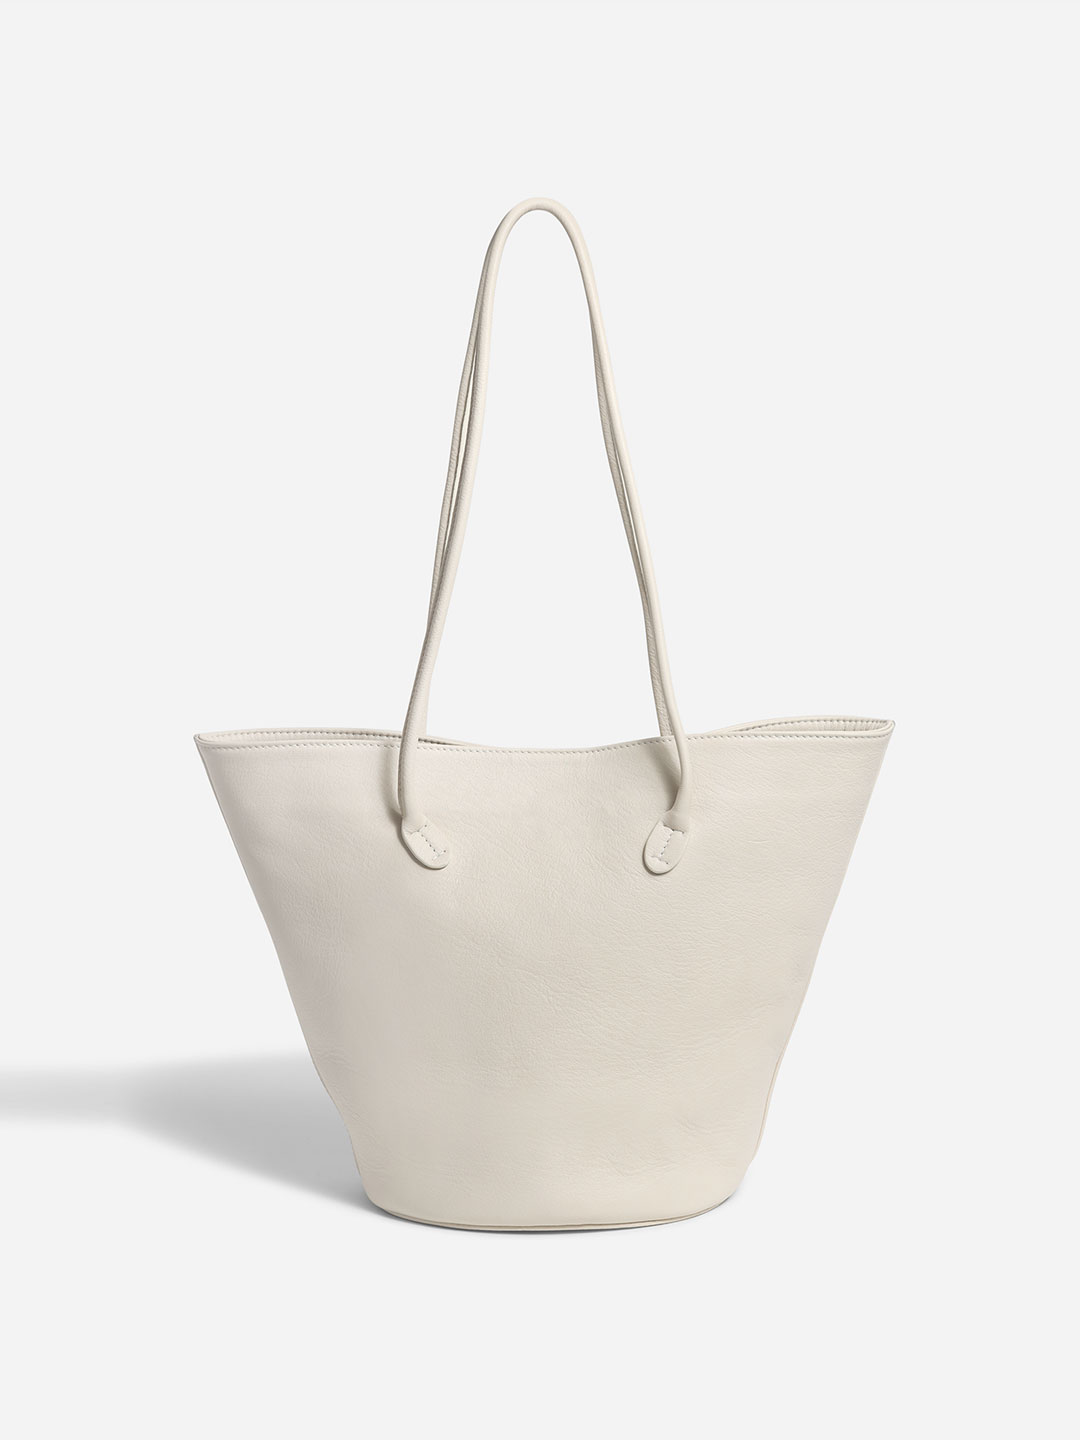 Soft Stucture Tall Oval Bucket Bag - Off White/Cream